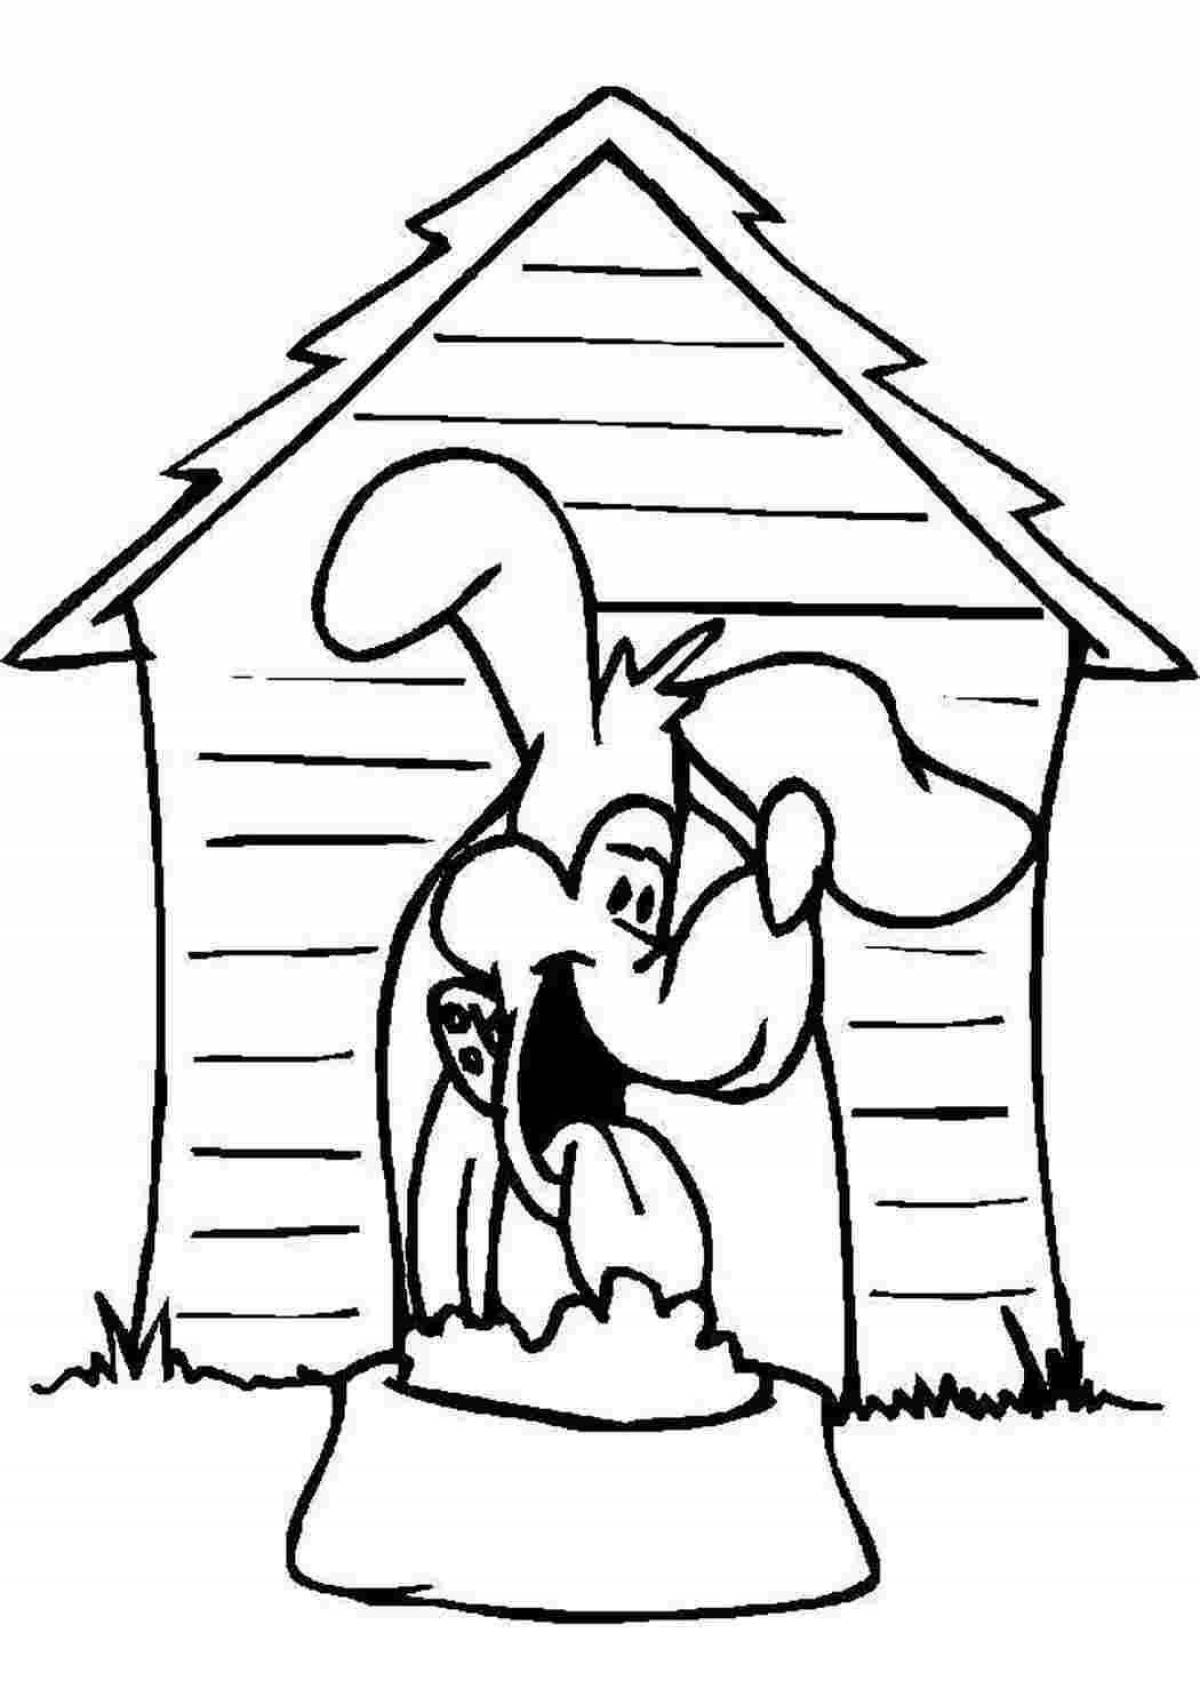 Coloring page dazzling doghouse